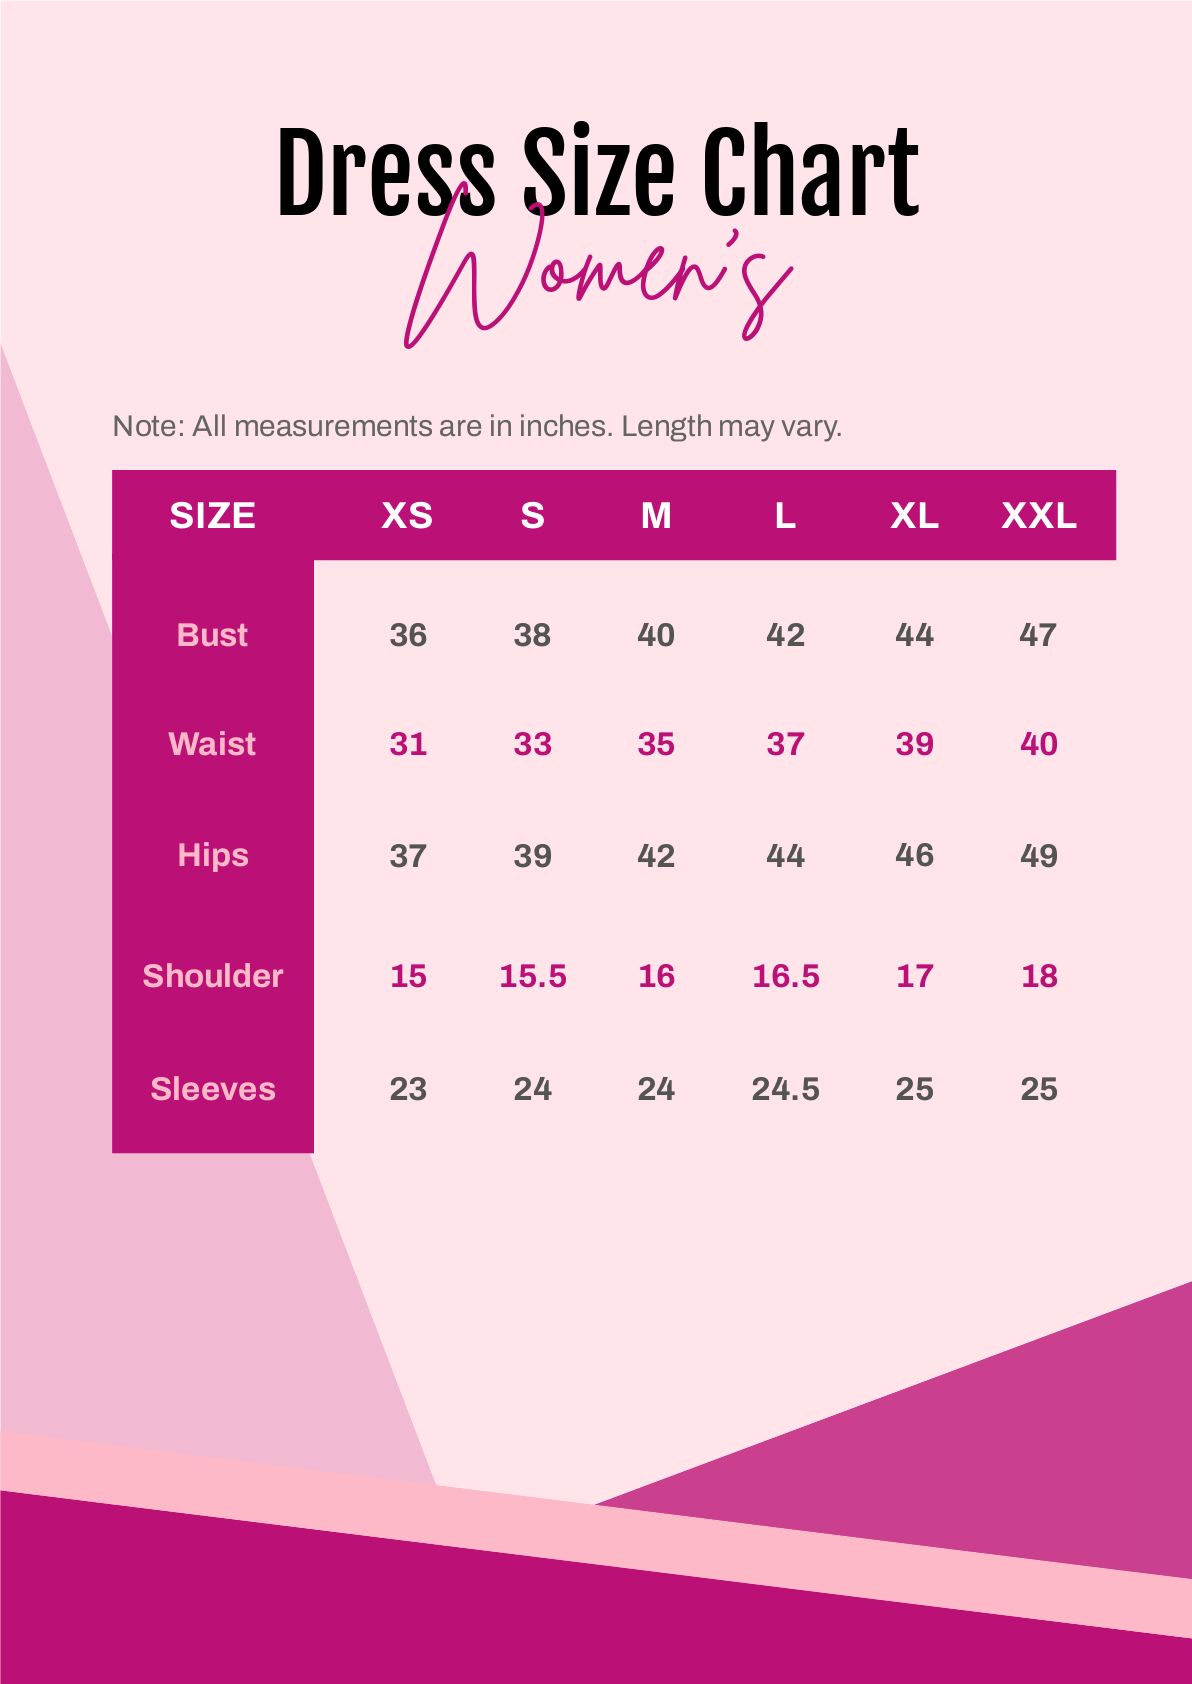 One Piece Dress Size Chart in PDF - Download | Template.net